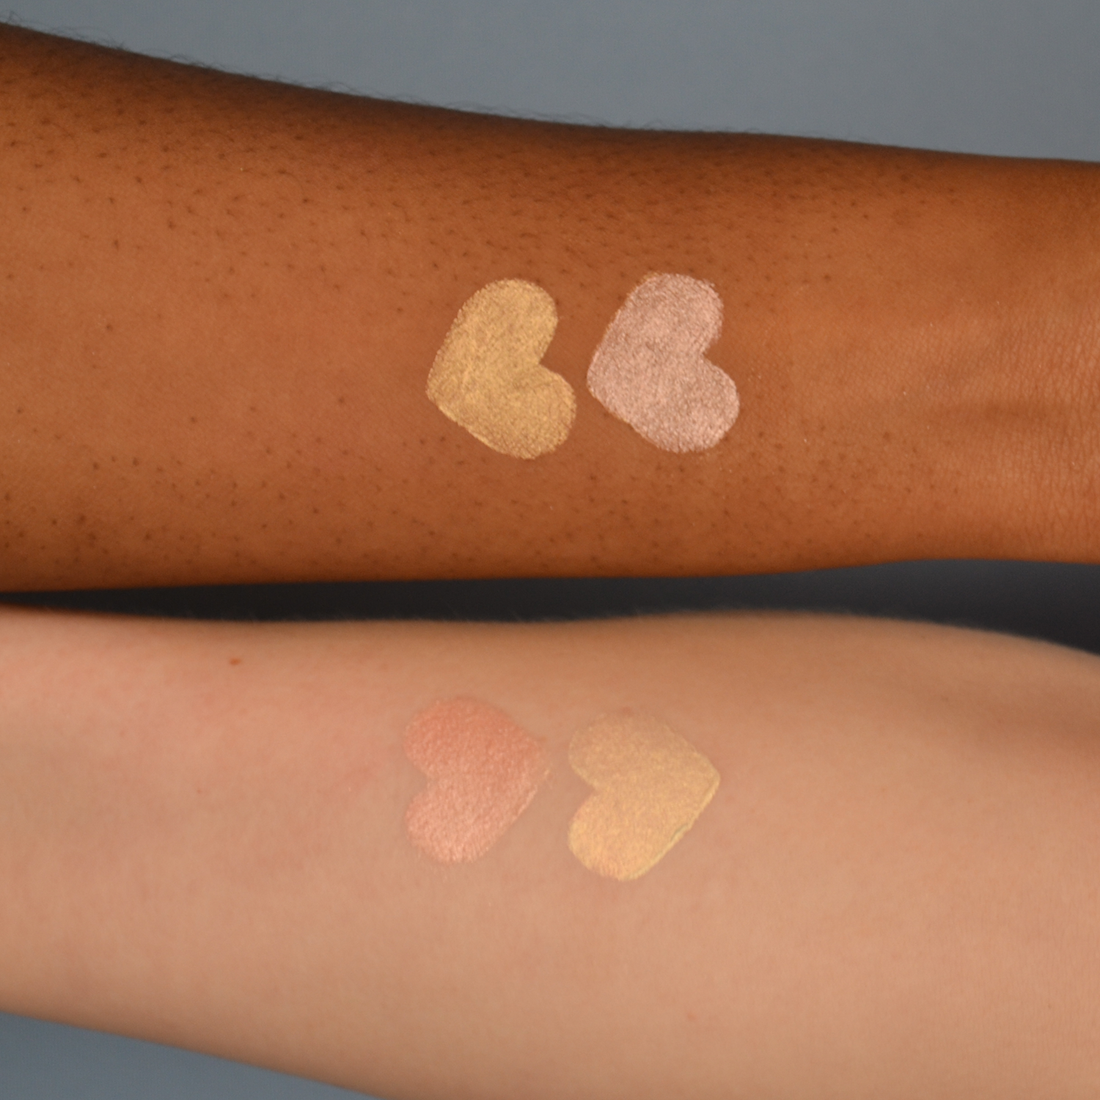 Swatches of shades Celestial and Ethereal on 2 arms, one with dark skin and one with light skin